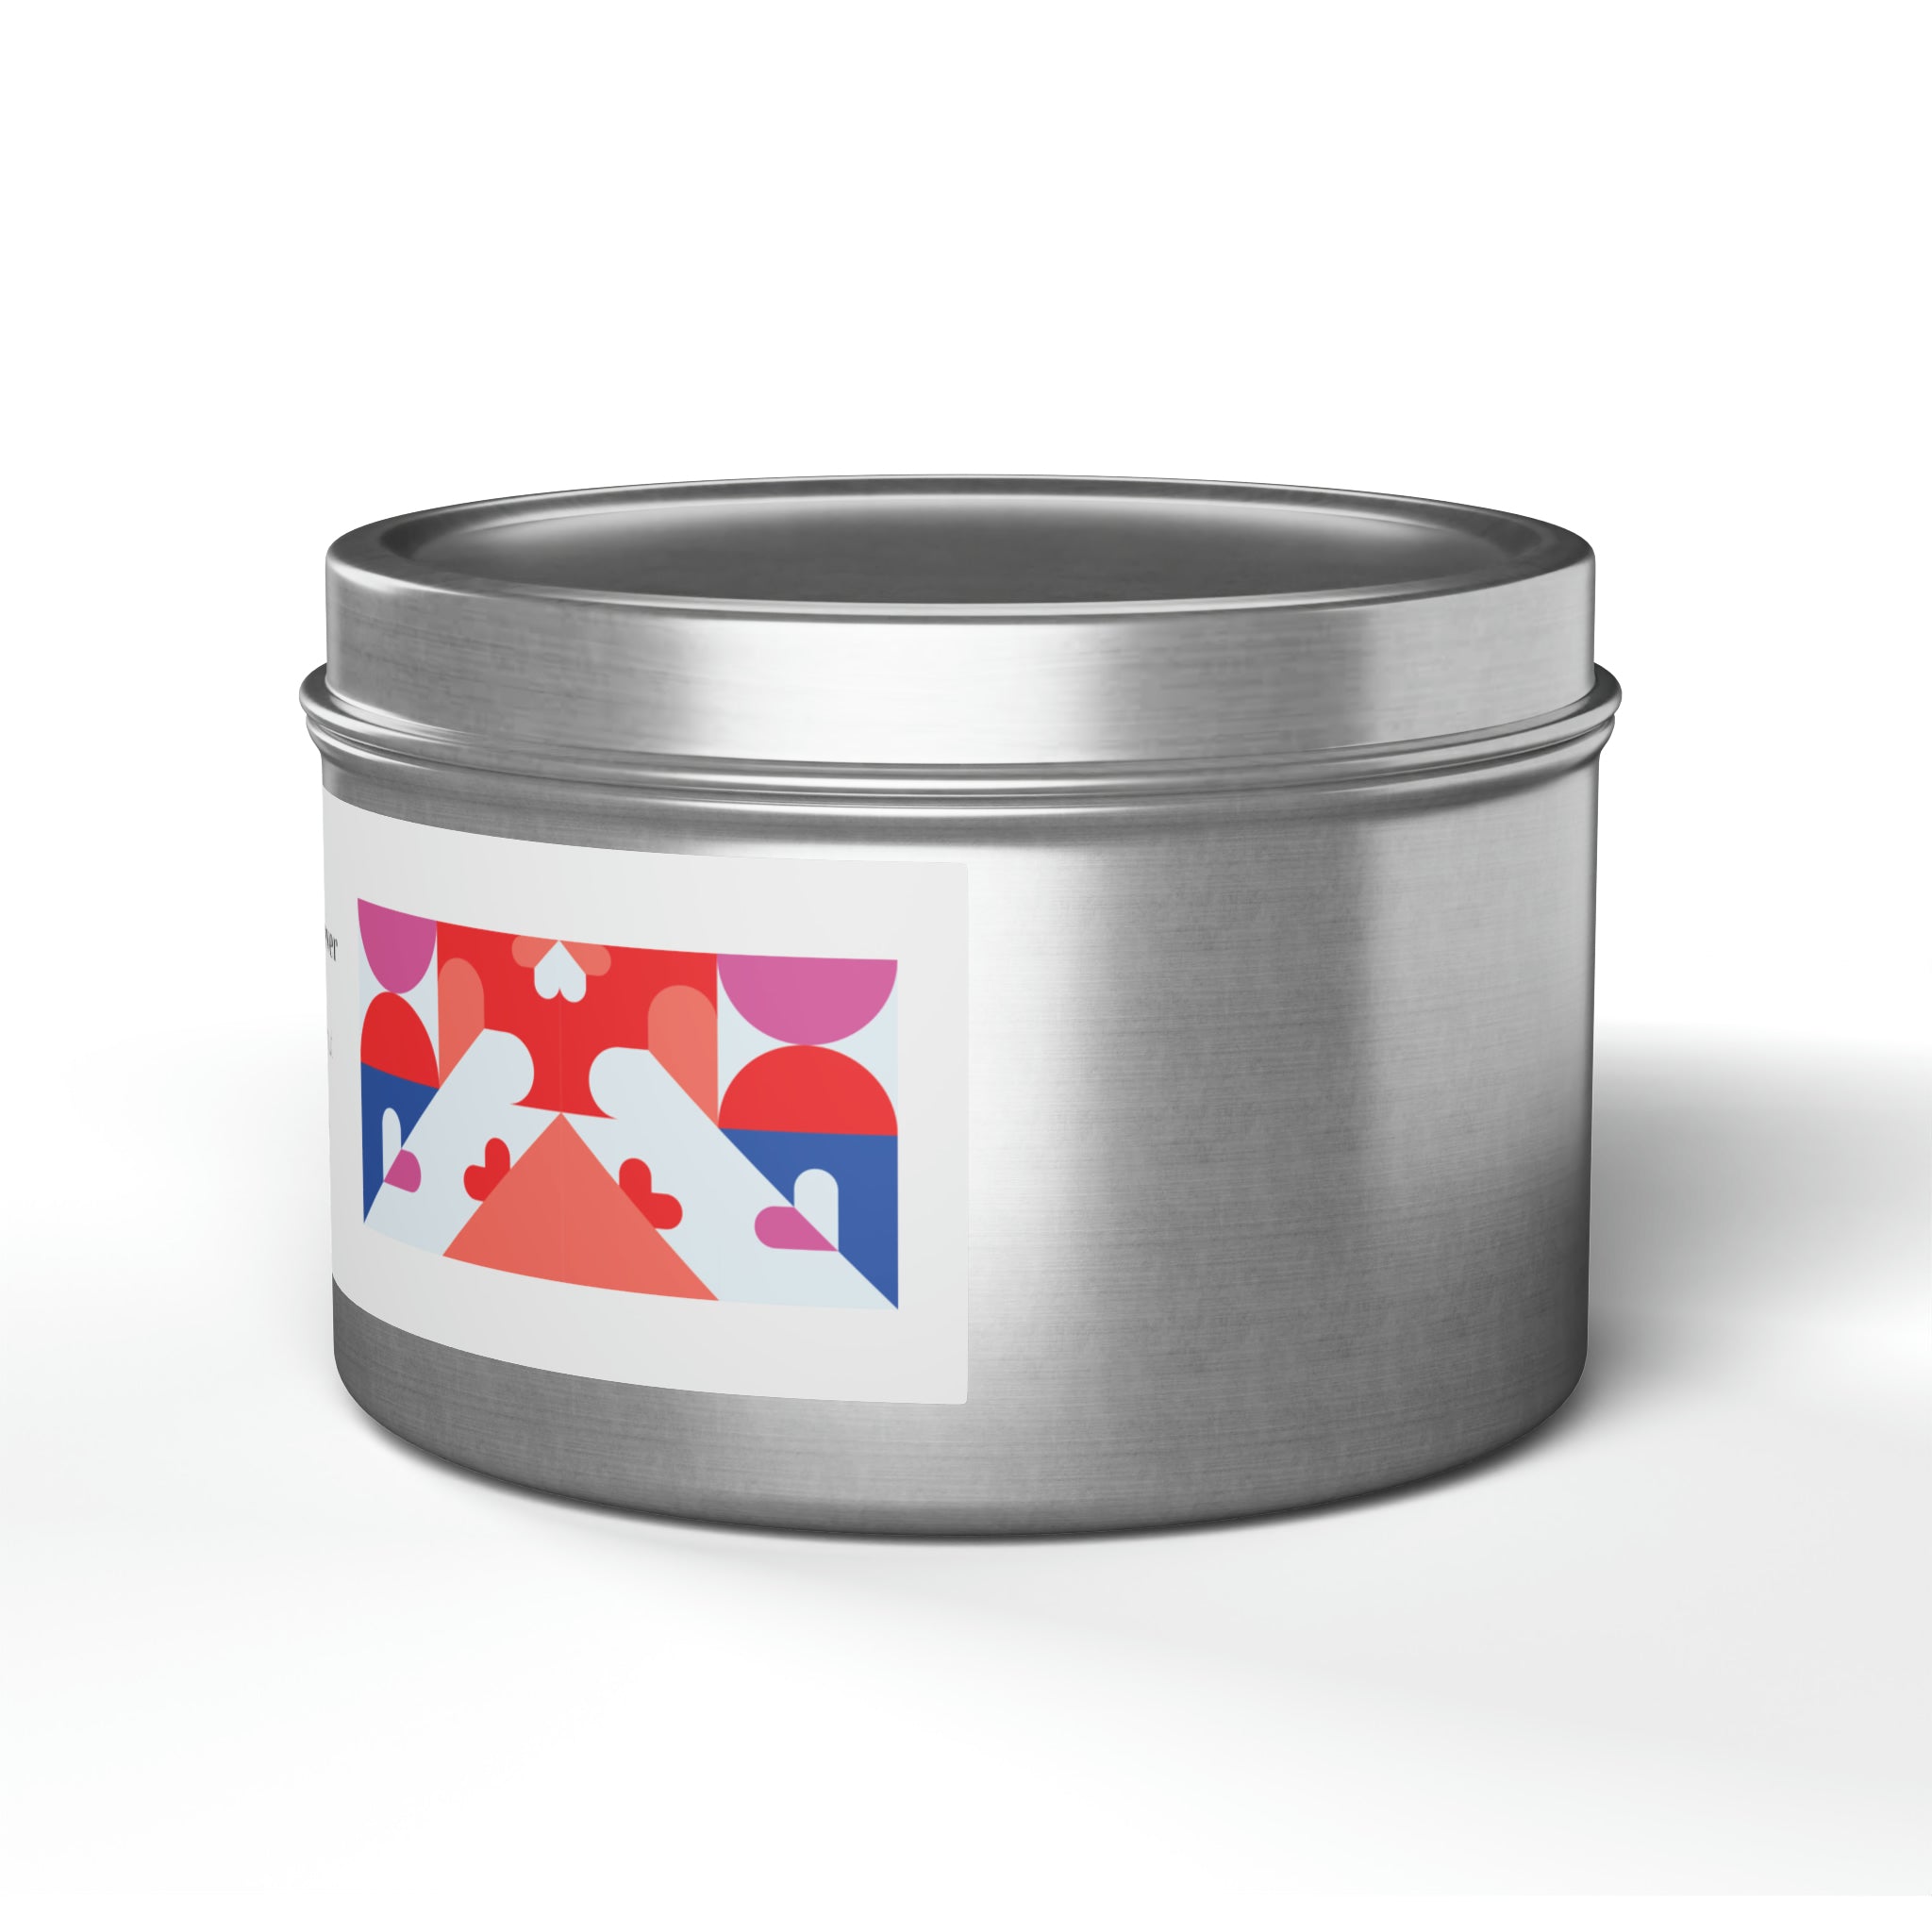 Mango coconut Always & Forever Soy base candle love, valentine's day gift Tin Candles-100